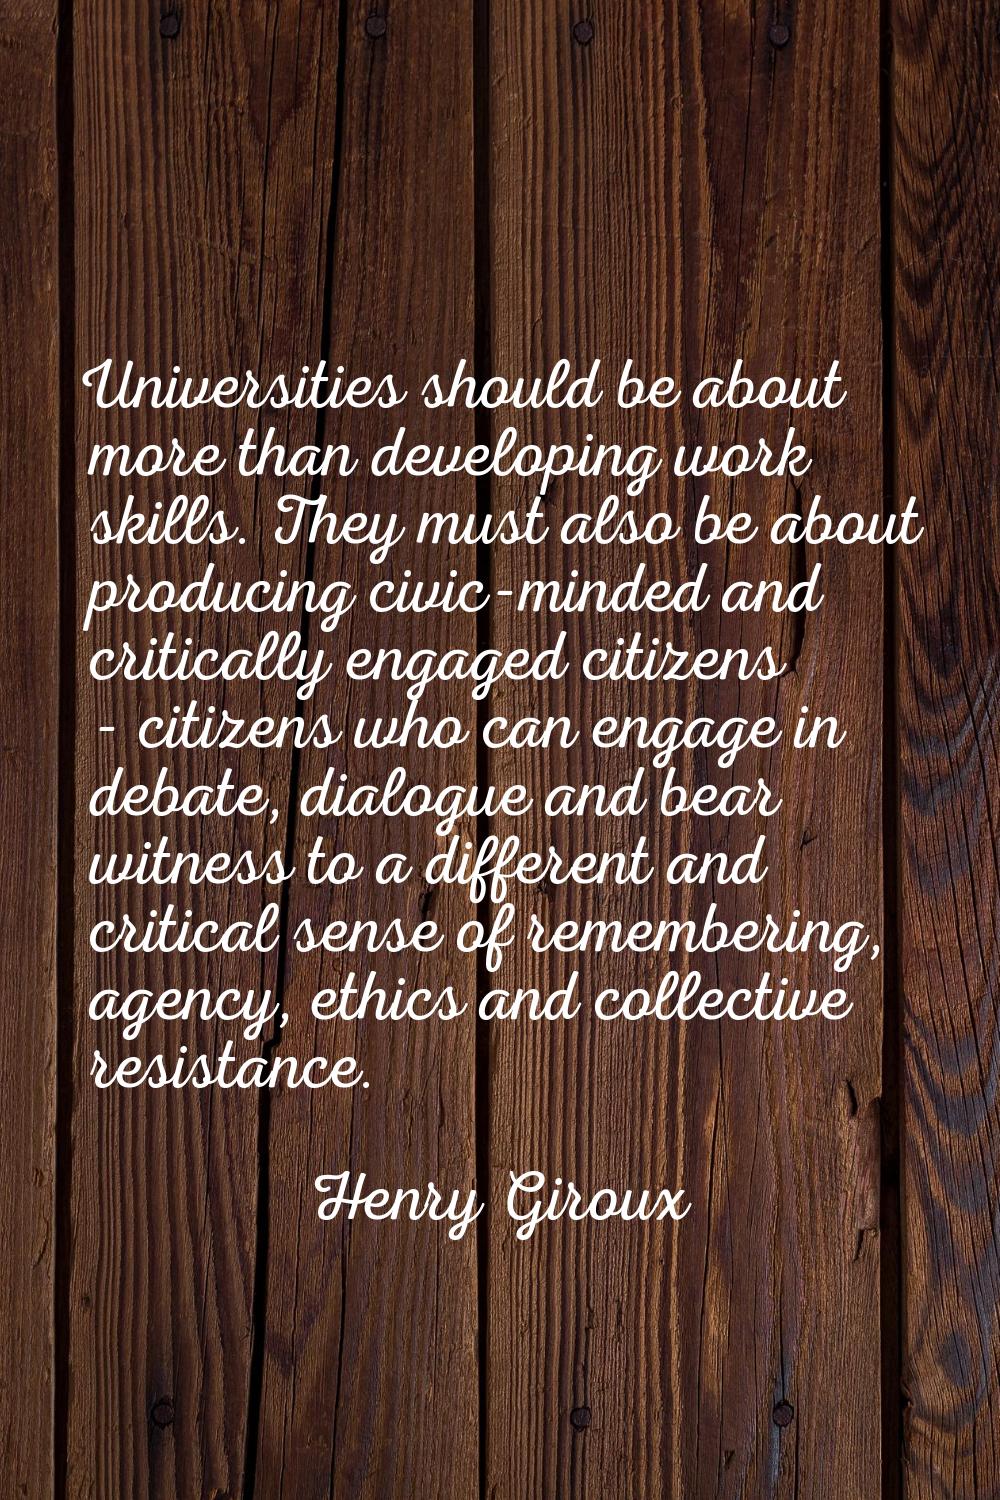 Universities should be about more than developing work skills. They must also be about producing ci